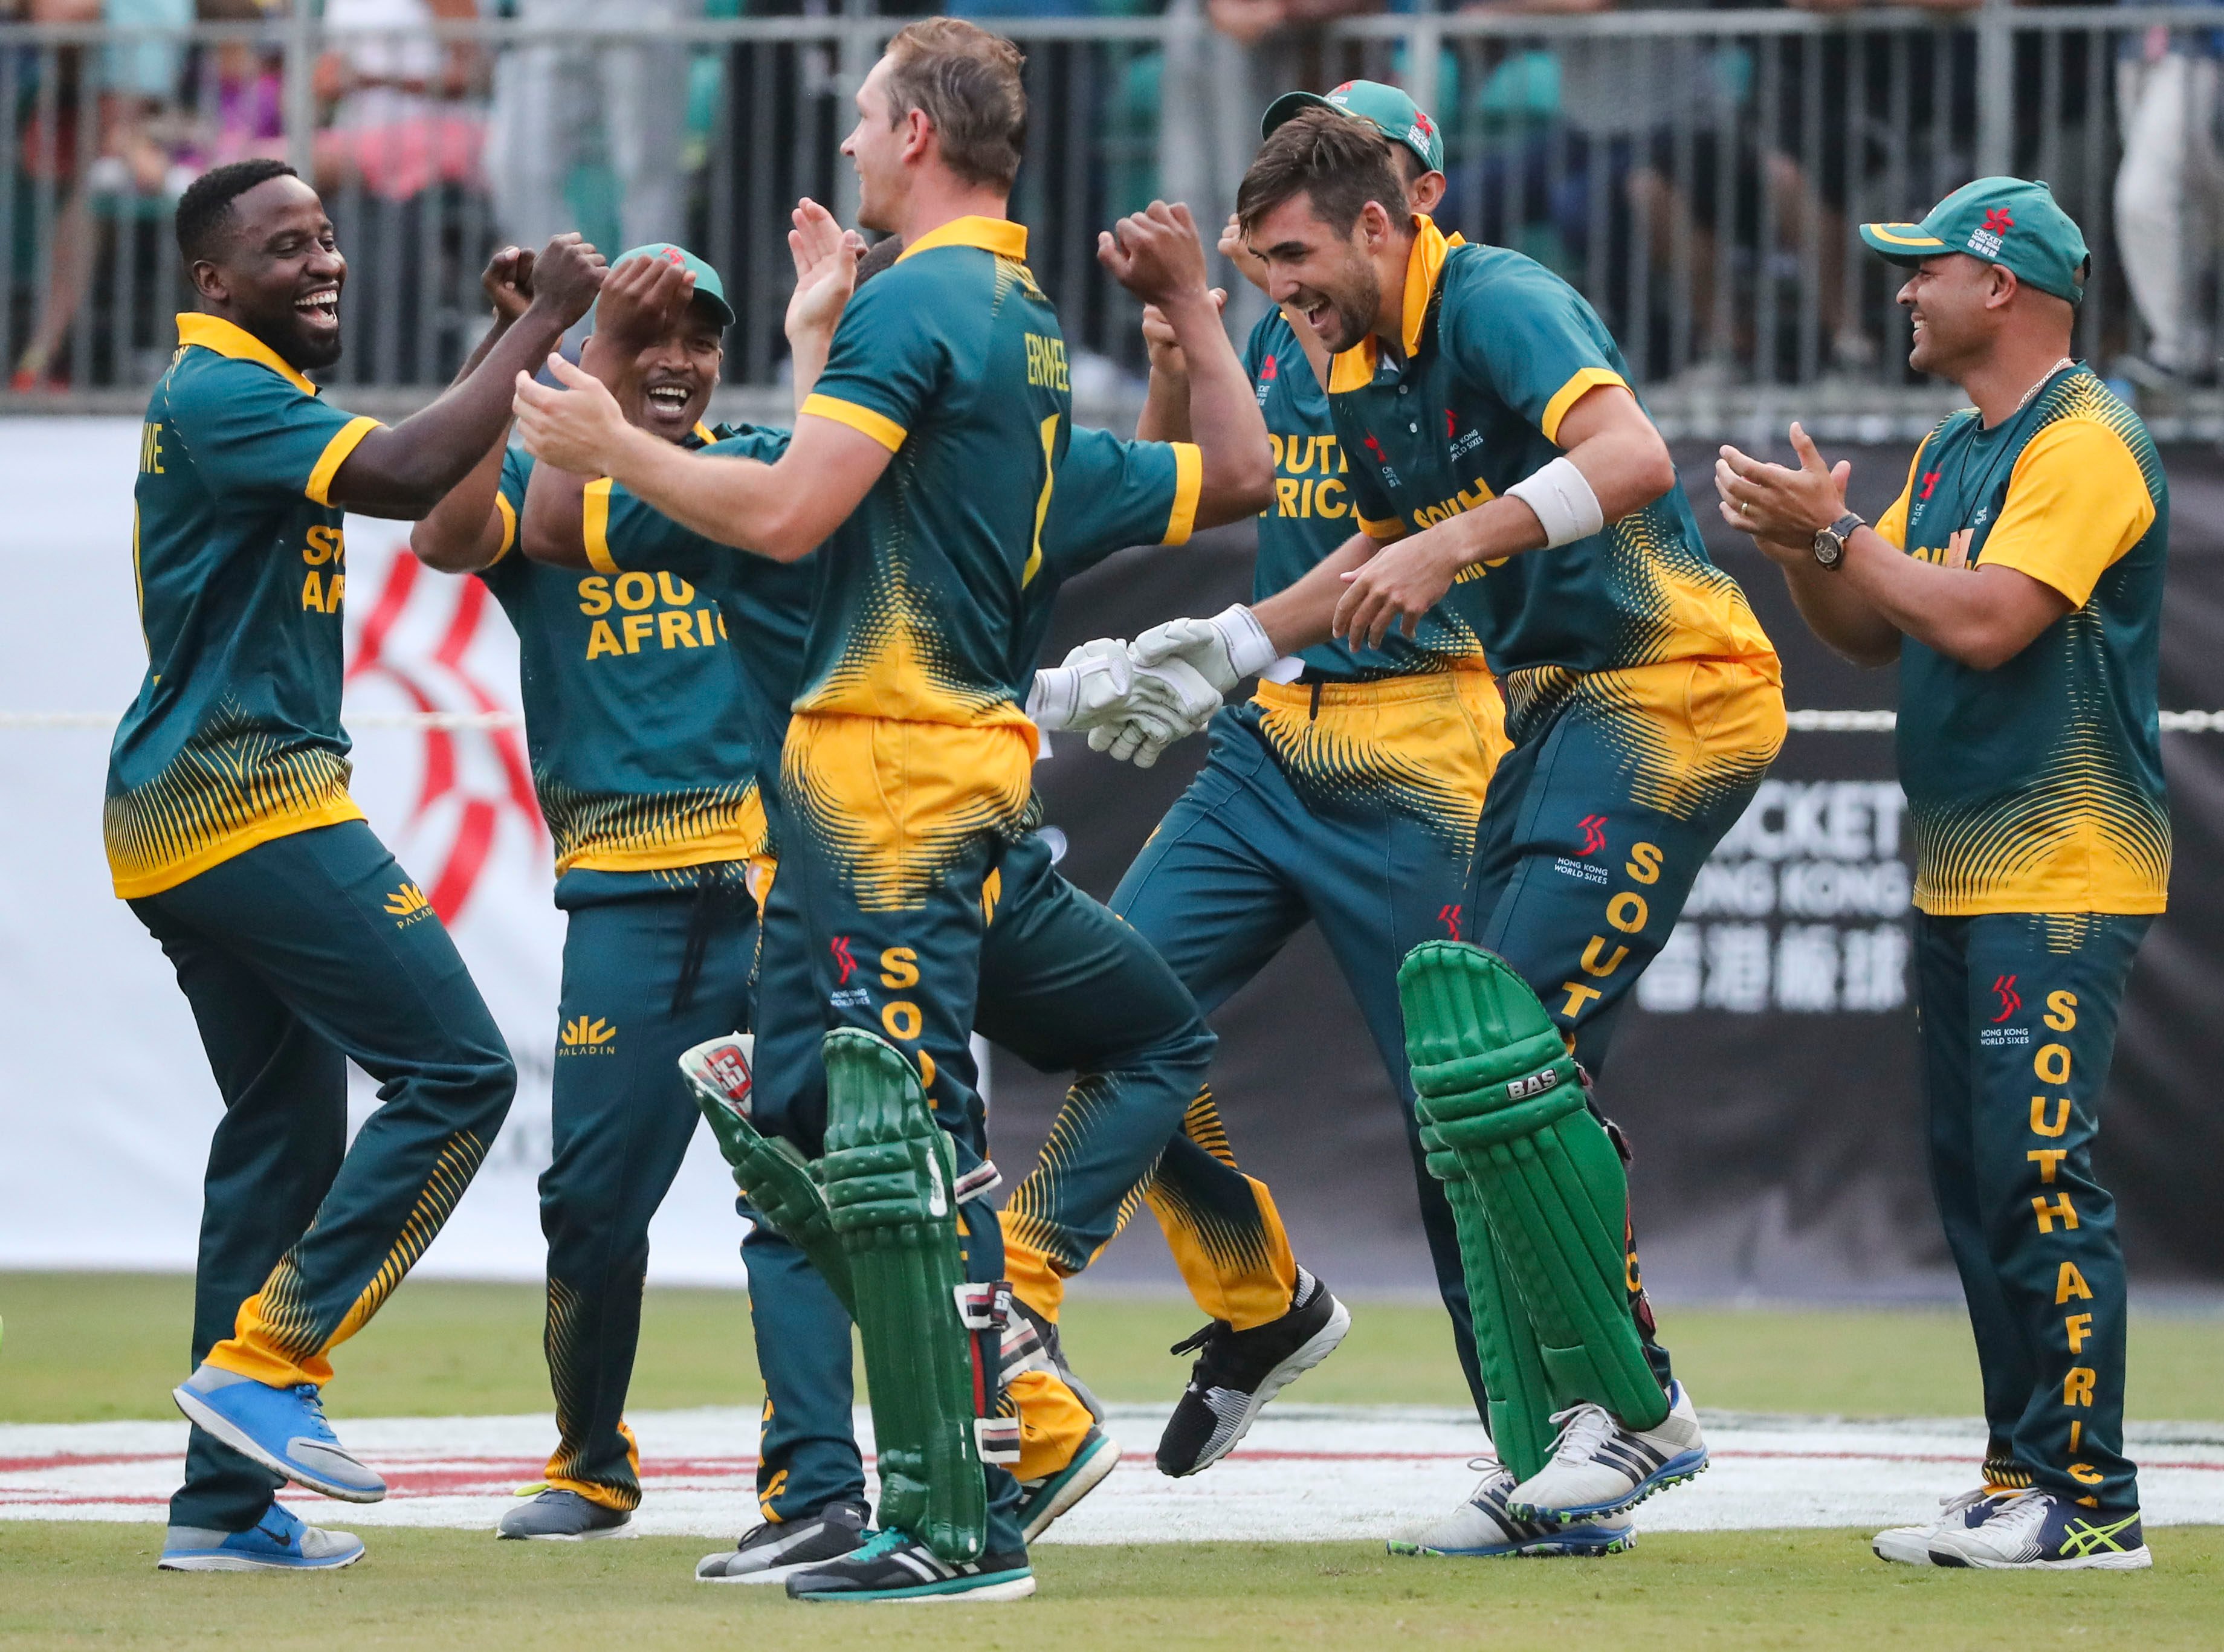 South Africa celebrate winning the Hong Kong World Sixes 2017 at Kowloon Cricket Club. Photo: K.Y. Cheng